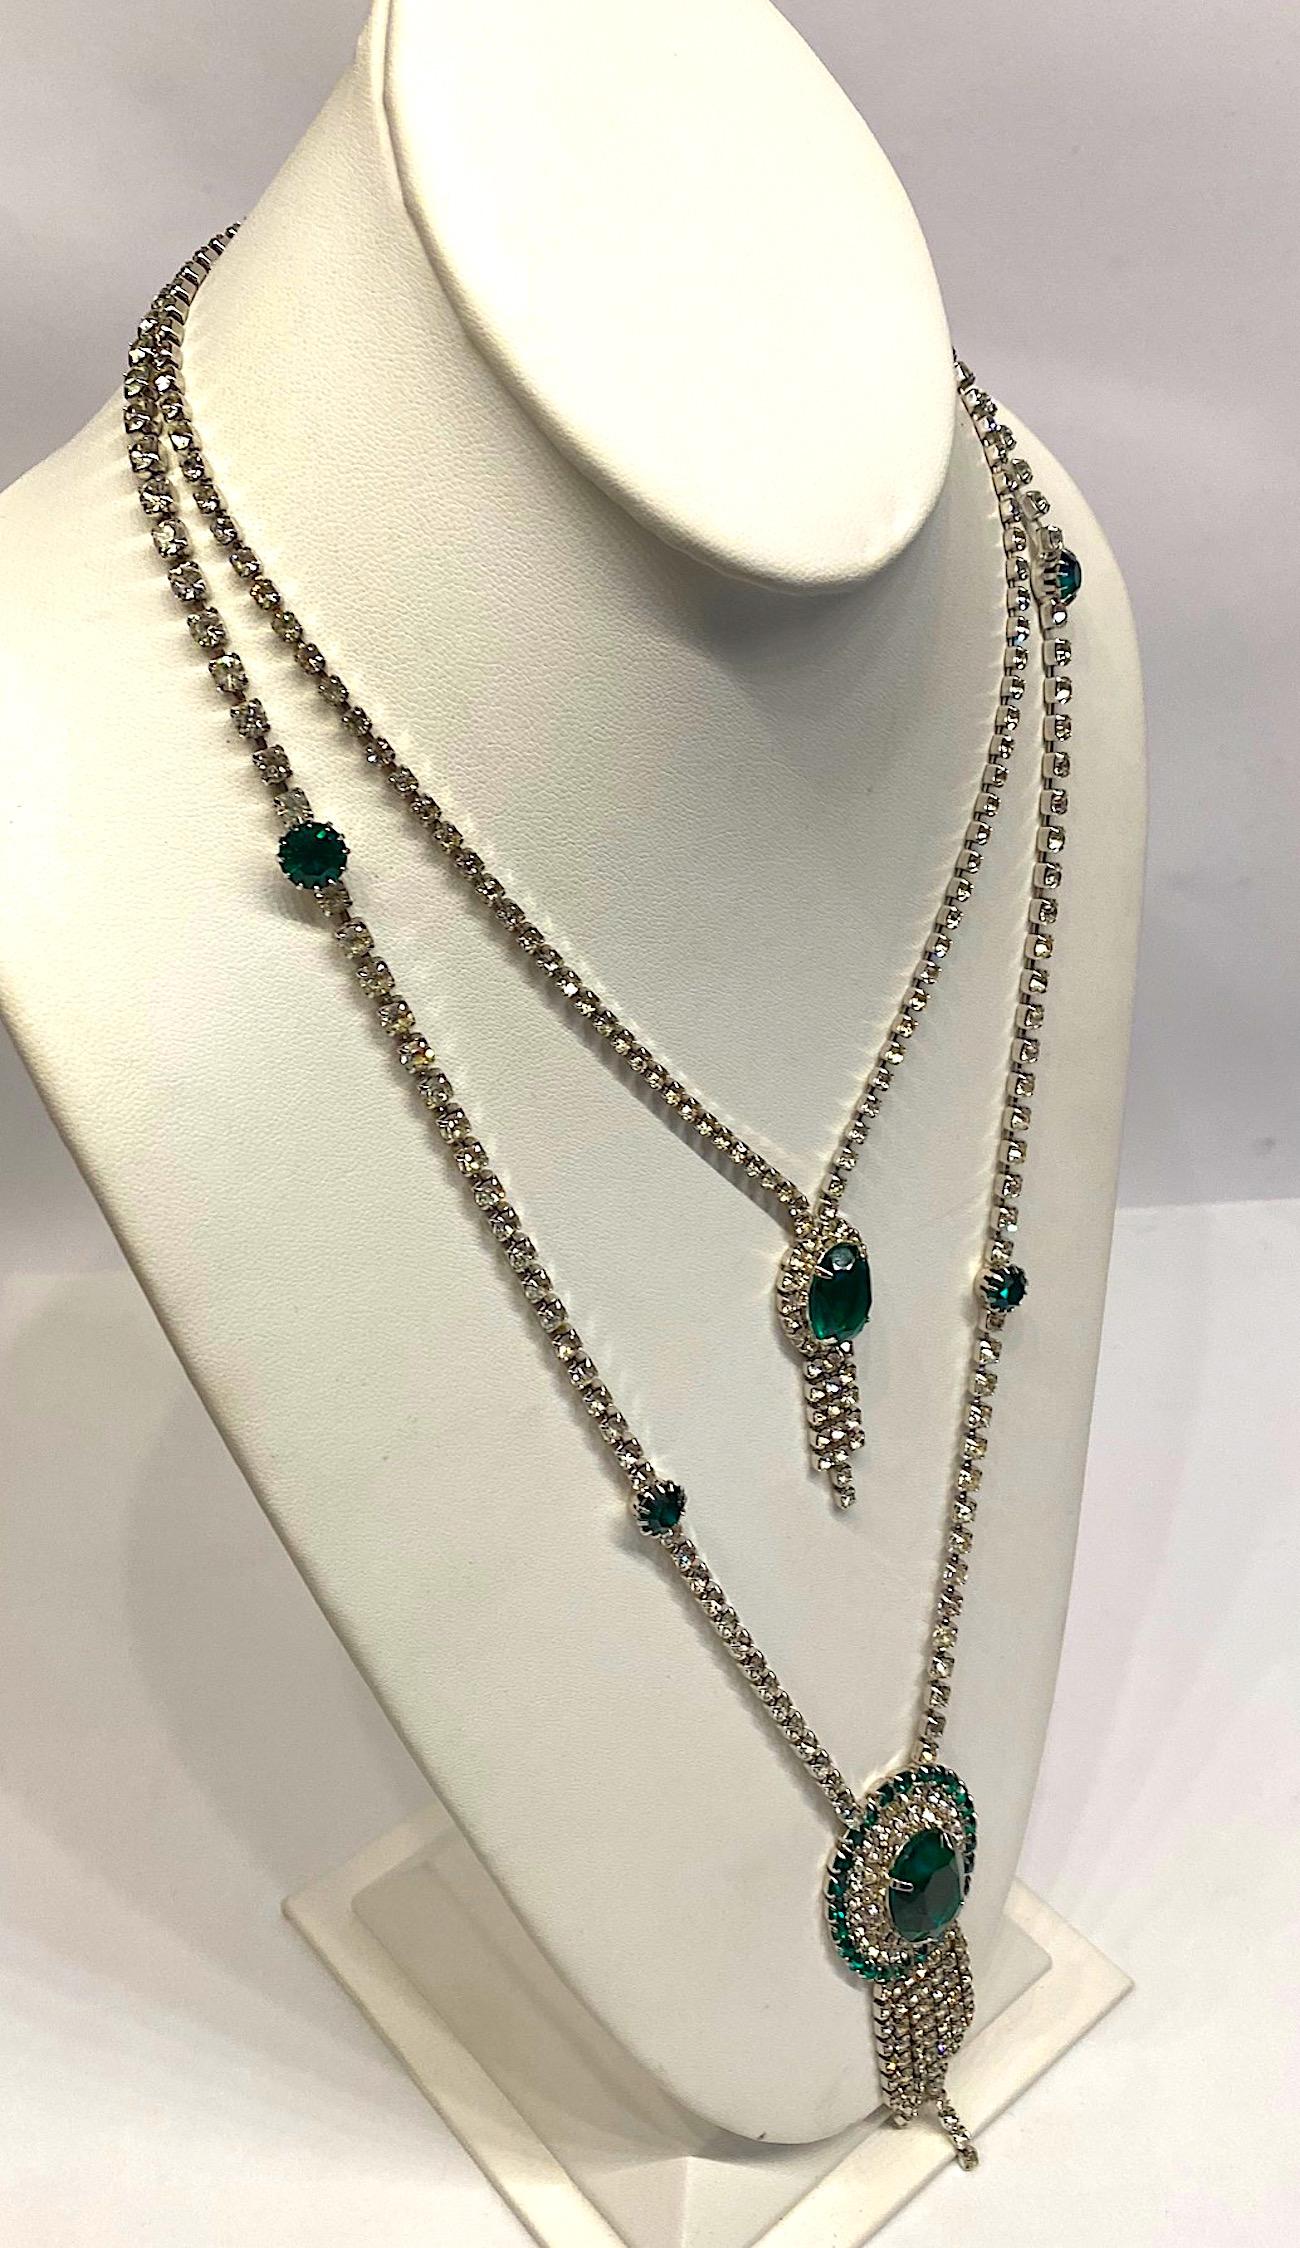 1950s / 1960s Emerald Green Crystal & Rhinestone Double Pendant Necklace 9